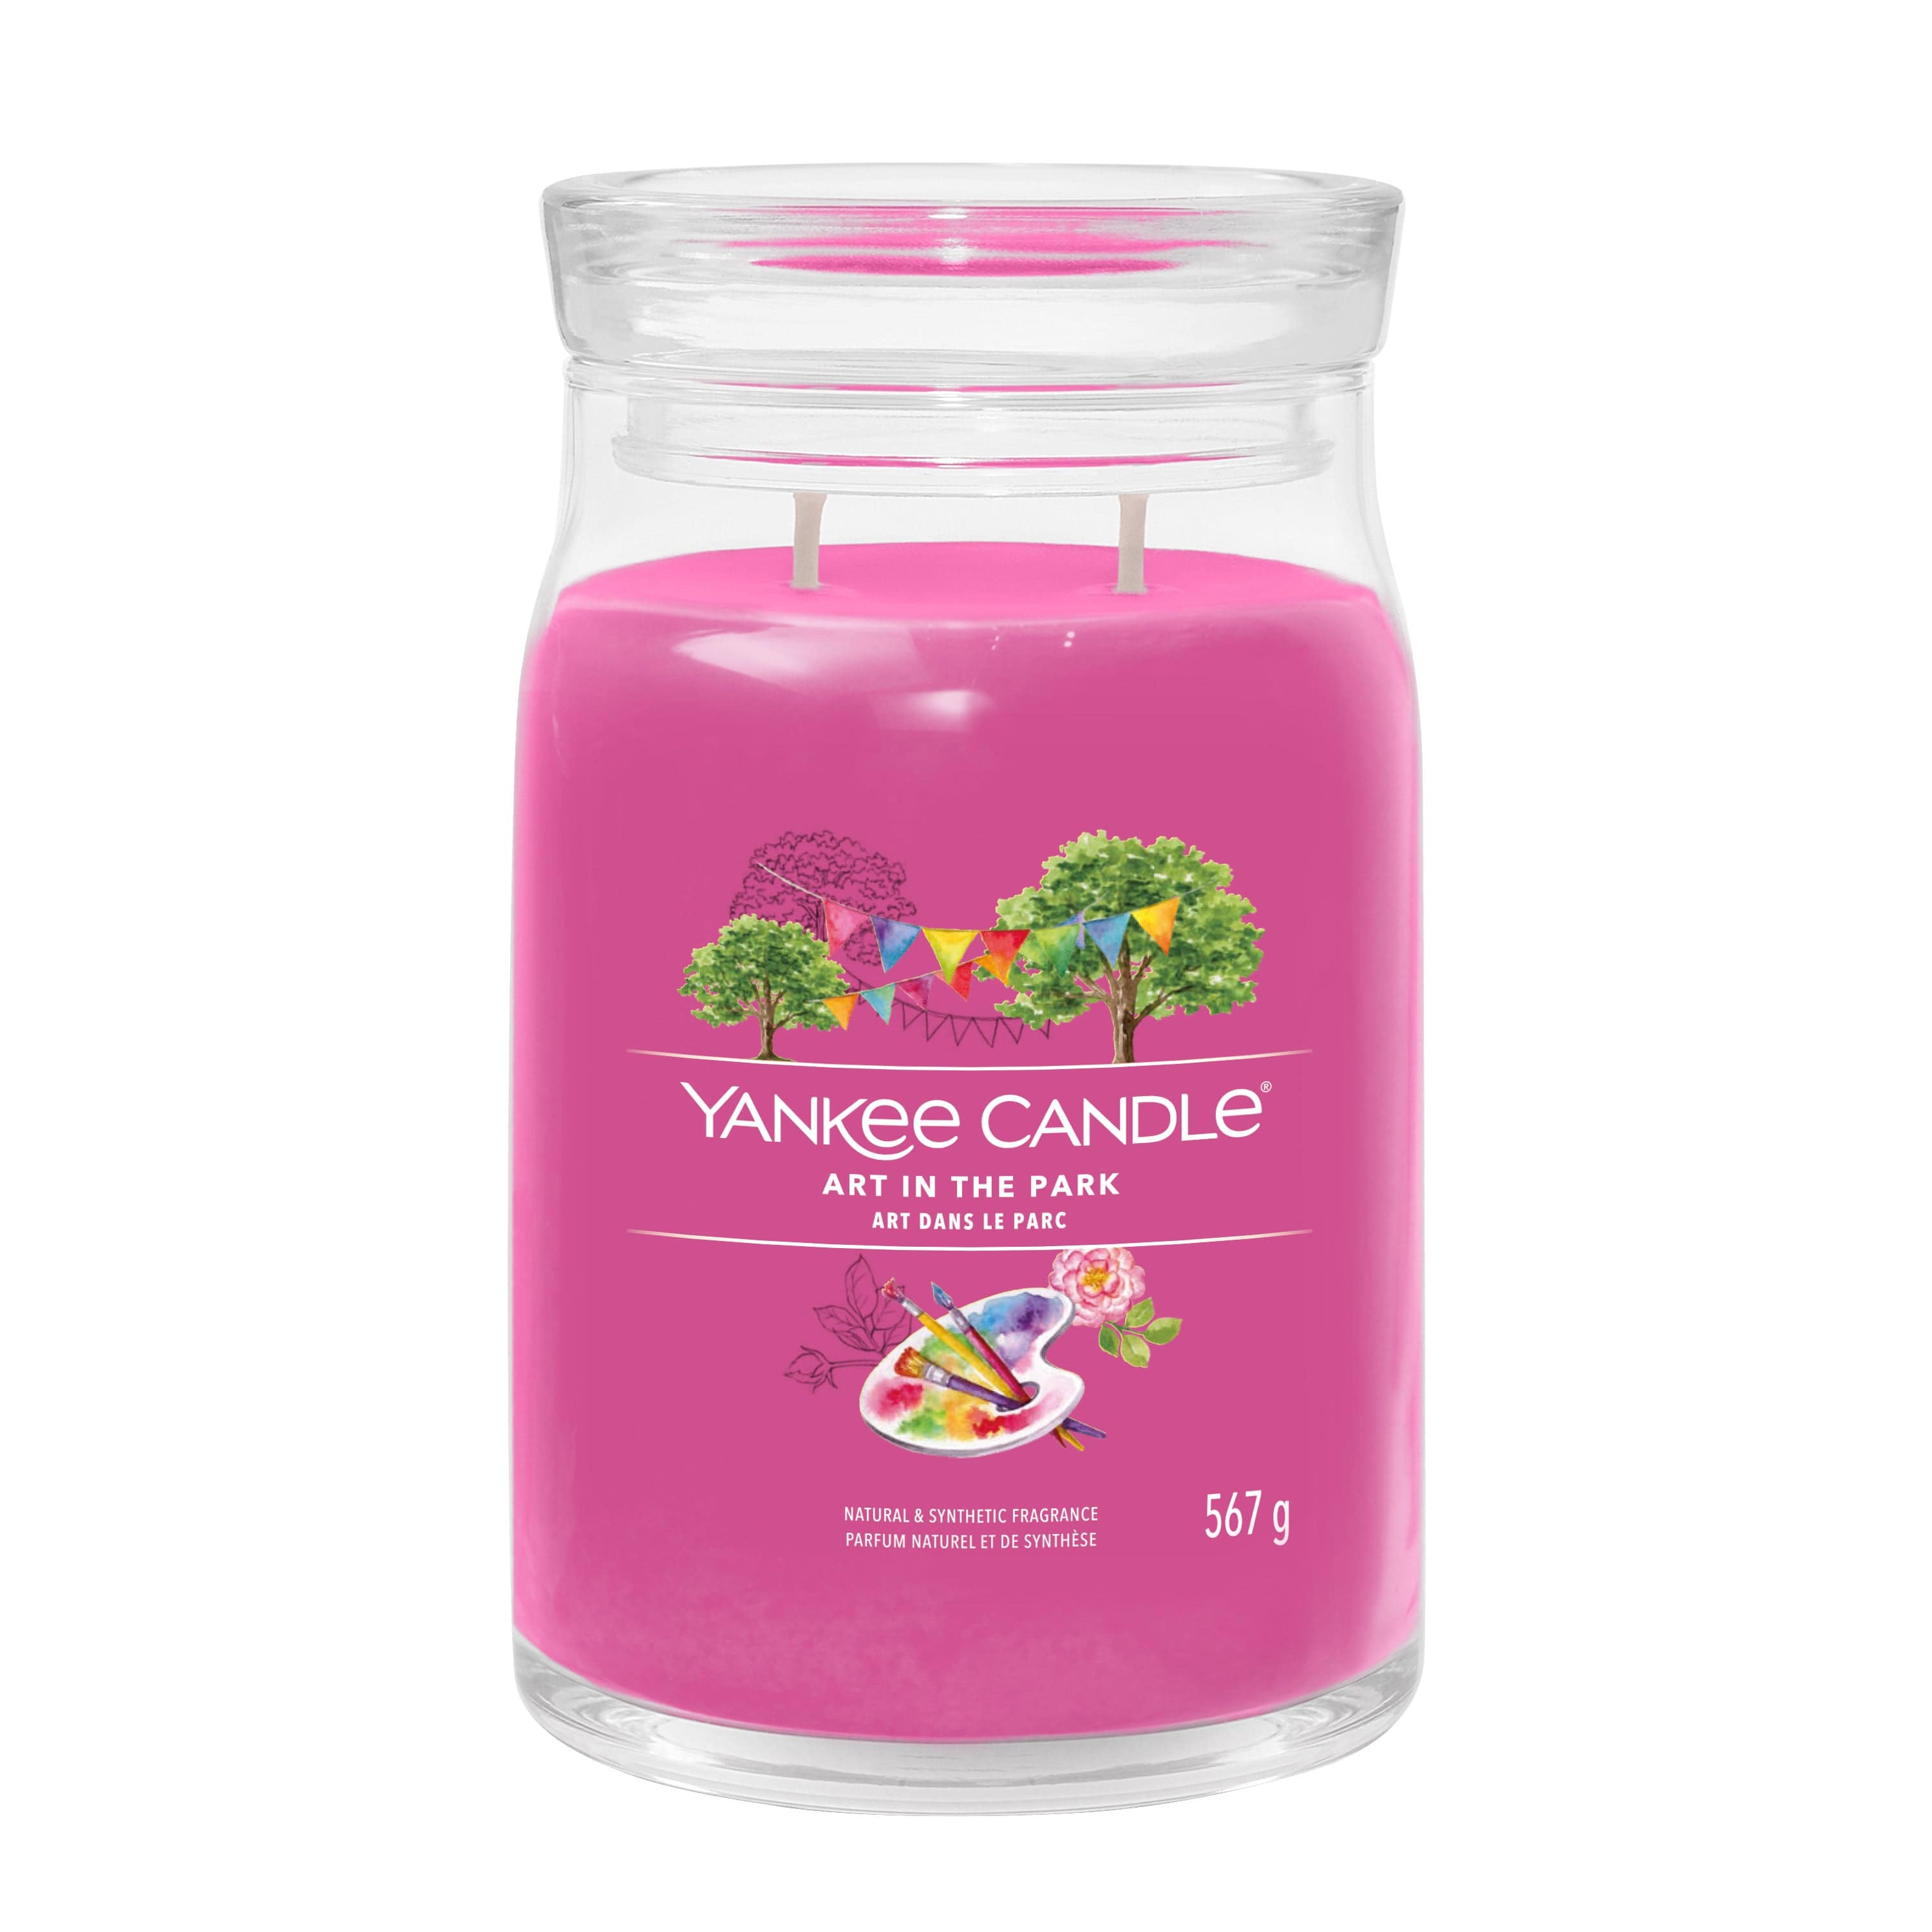 Yankee Candle Large 2 Wick Jar Candle Yankee Candle Large 2 Wick Jar  - Art in the Park